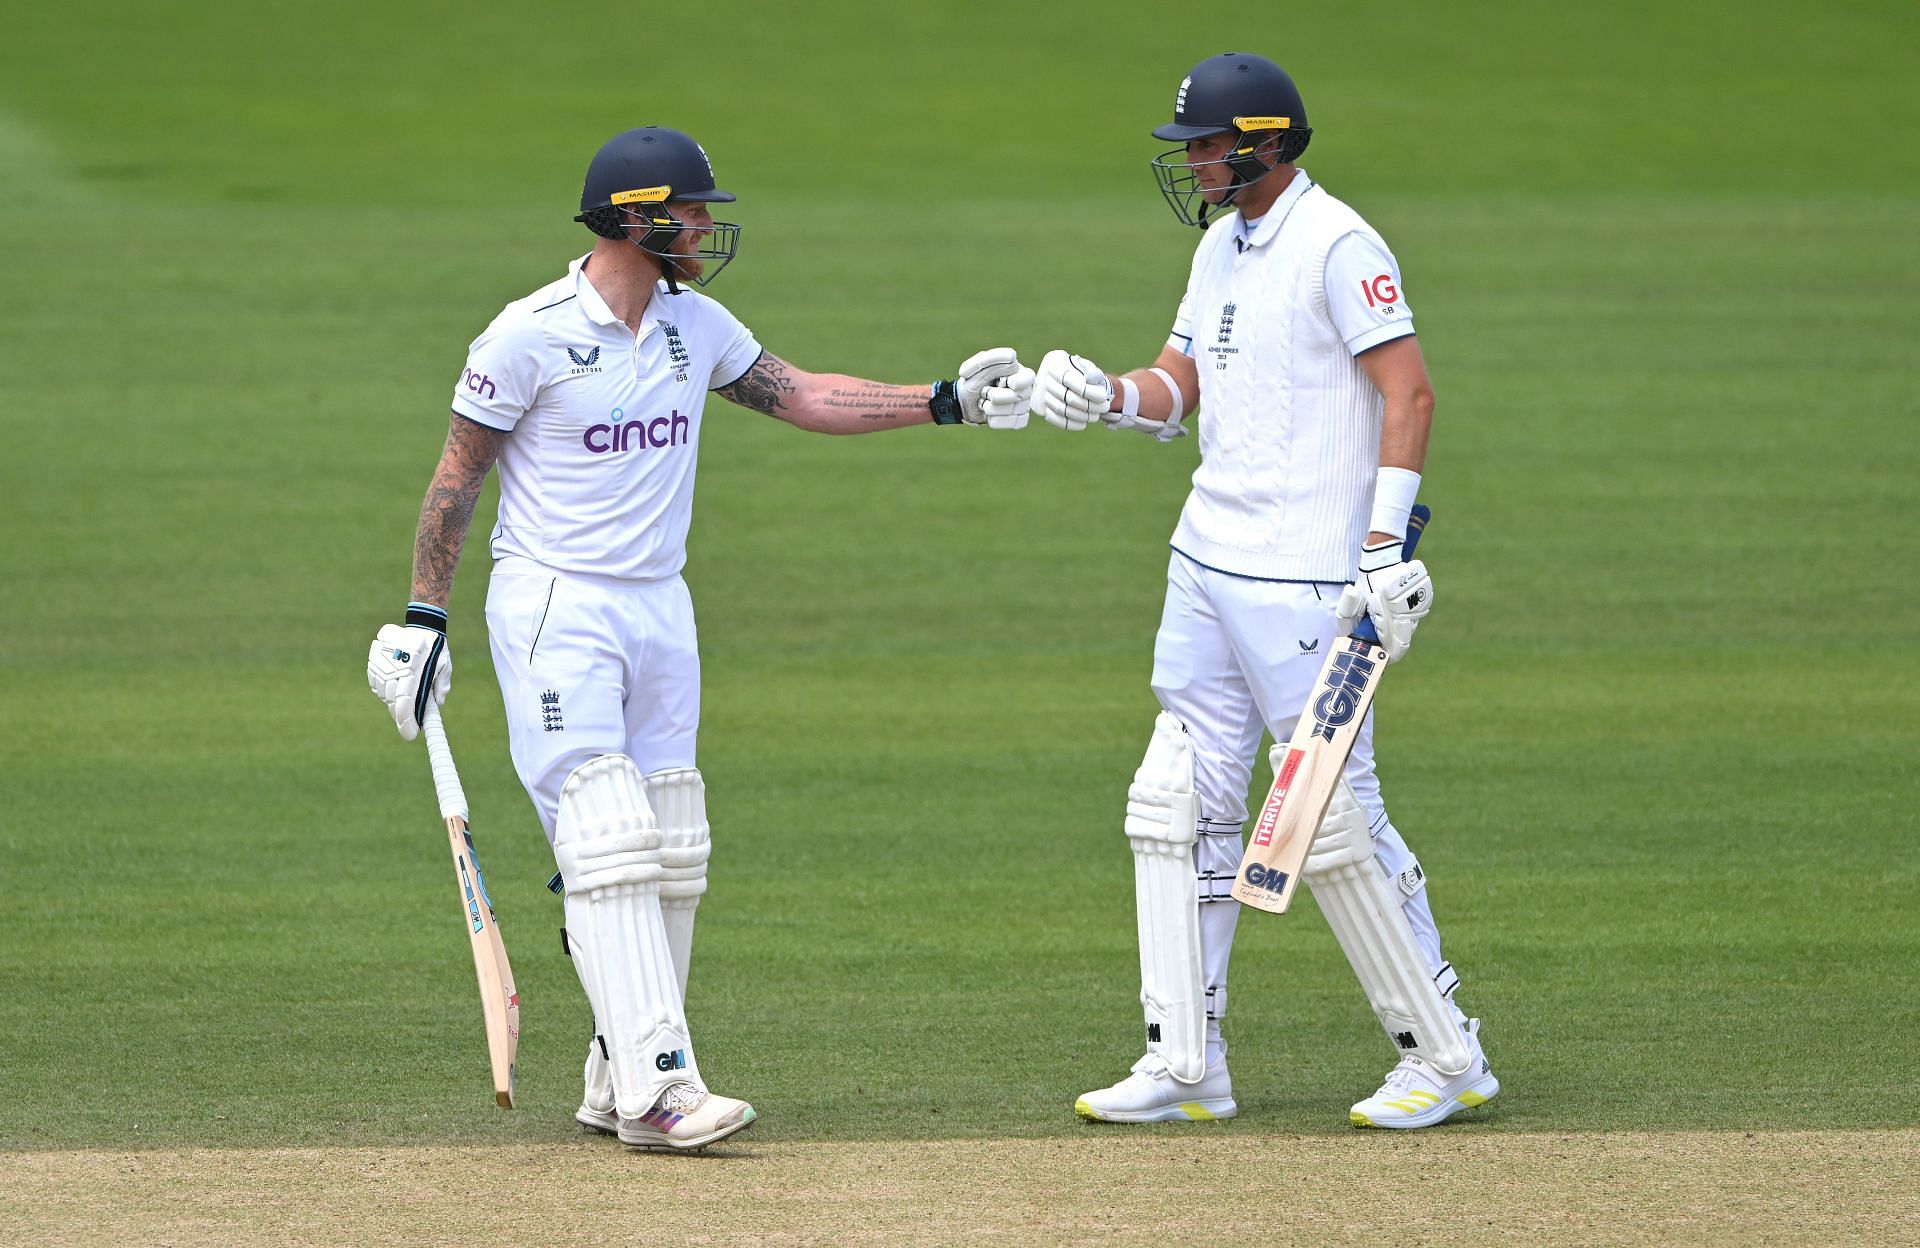 Ben Stokes and Stuart Broad strung together a 108-run seventh-wicket partnership.